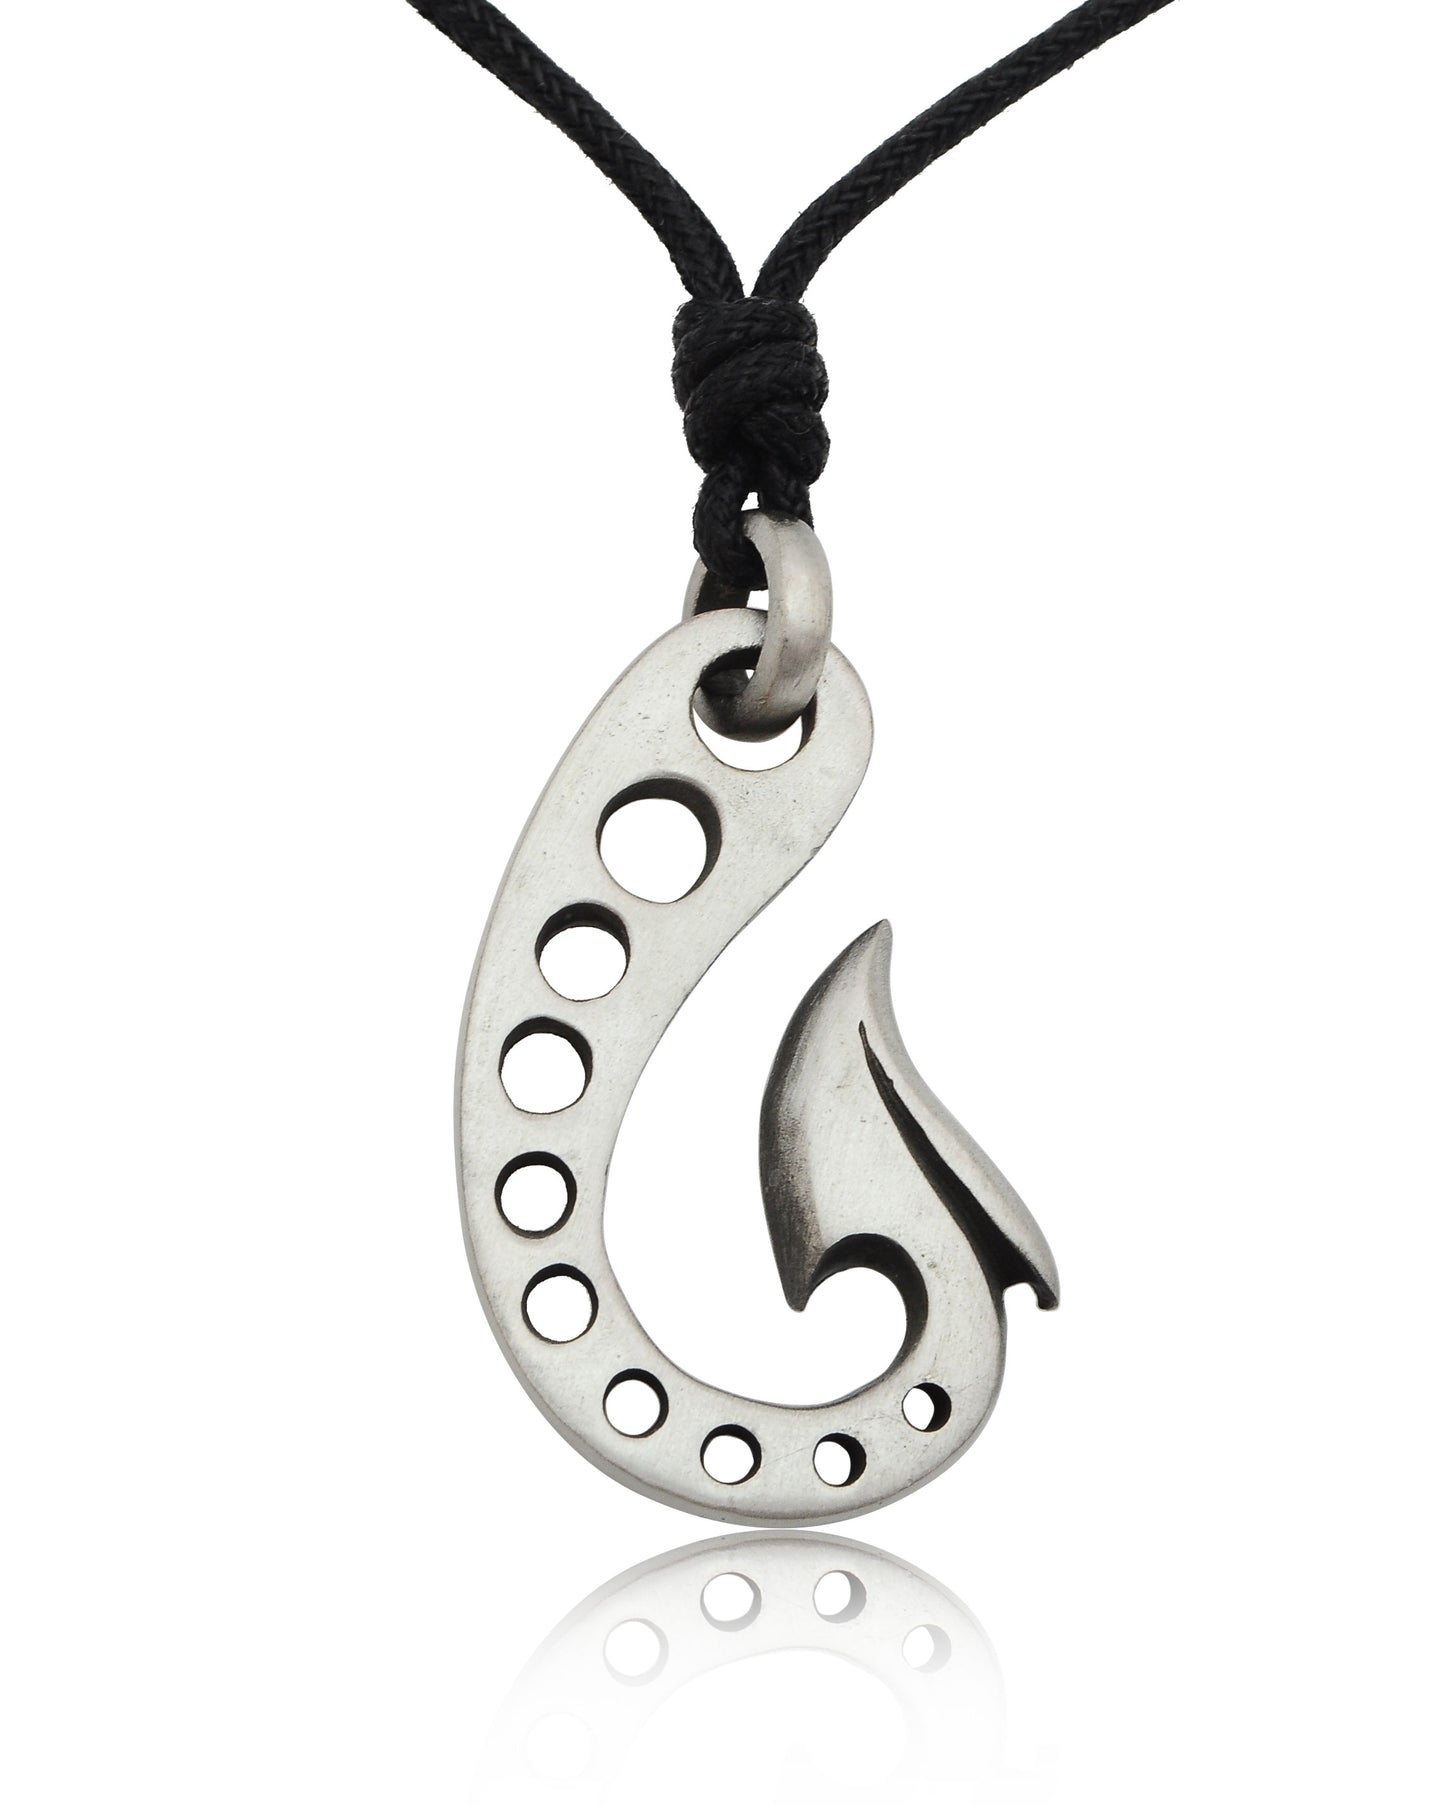 Maori Fishing Hook Silver Pewter Charm Necklace Pendant Jewelry